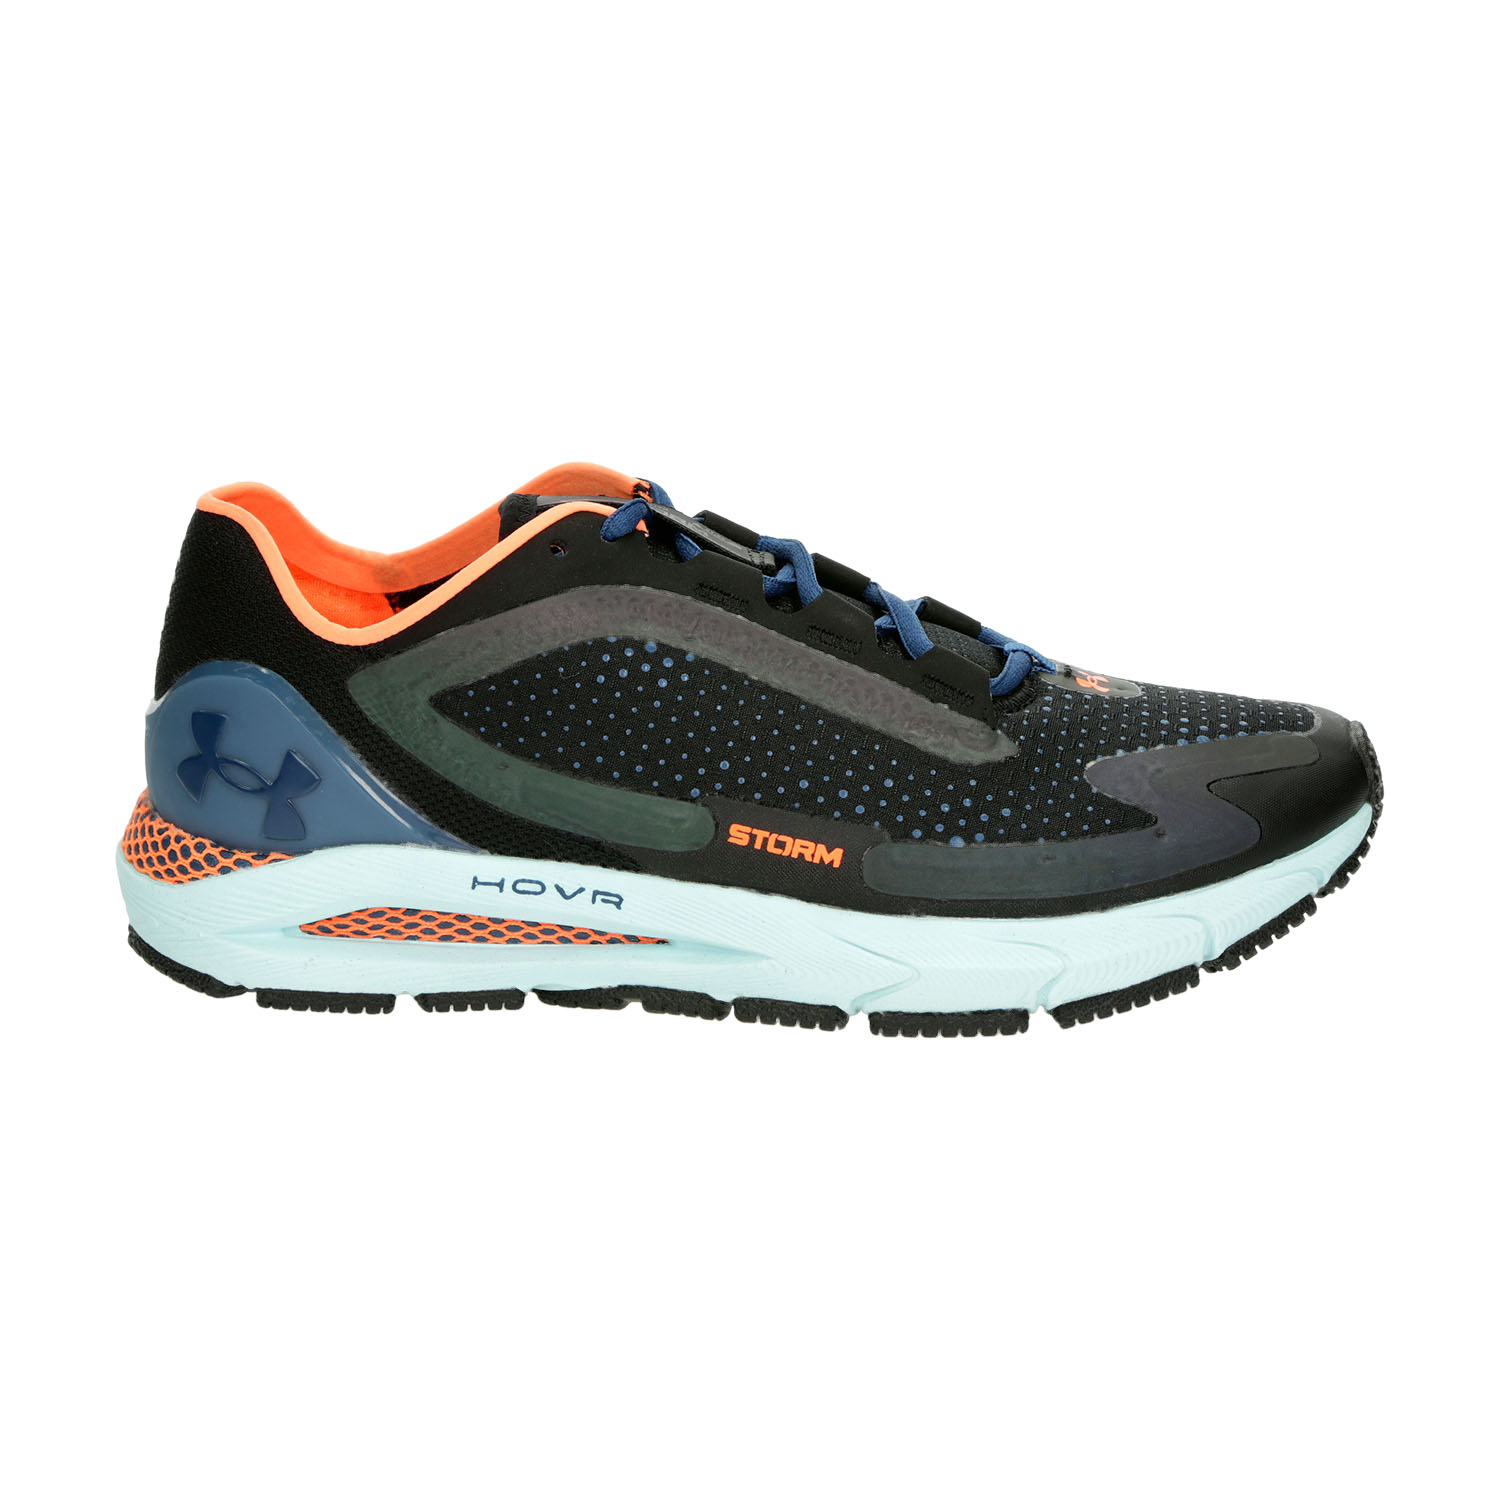 UNDER ARMOUR Zapatilla Running Mujer Gris Under Armour